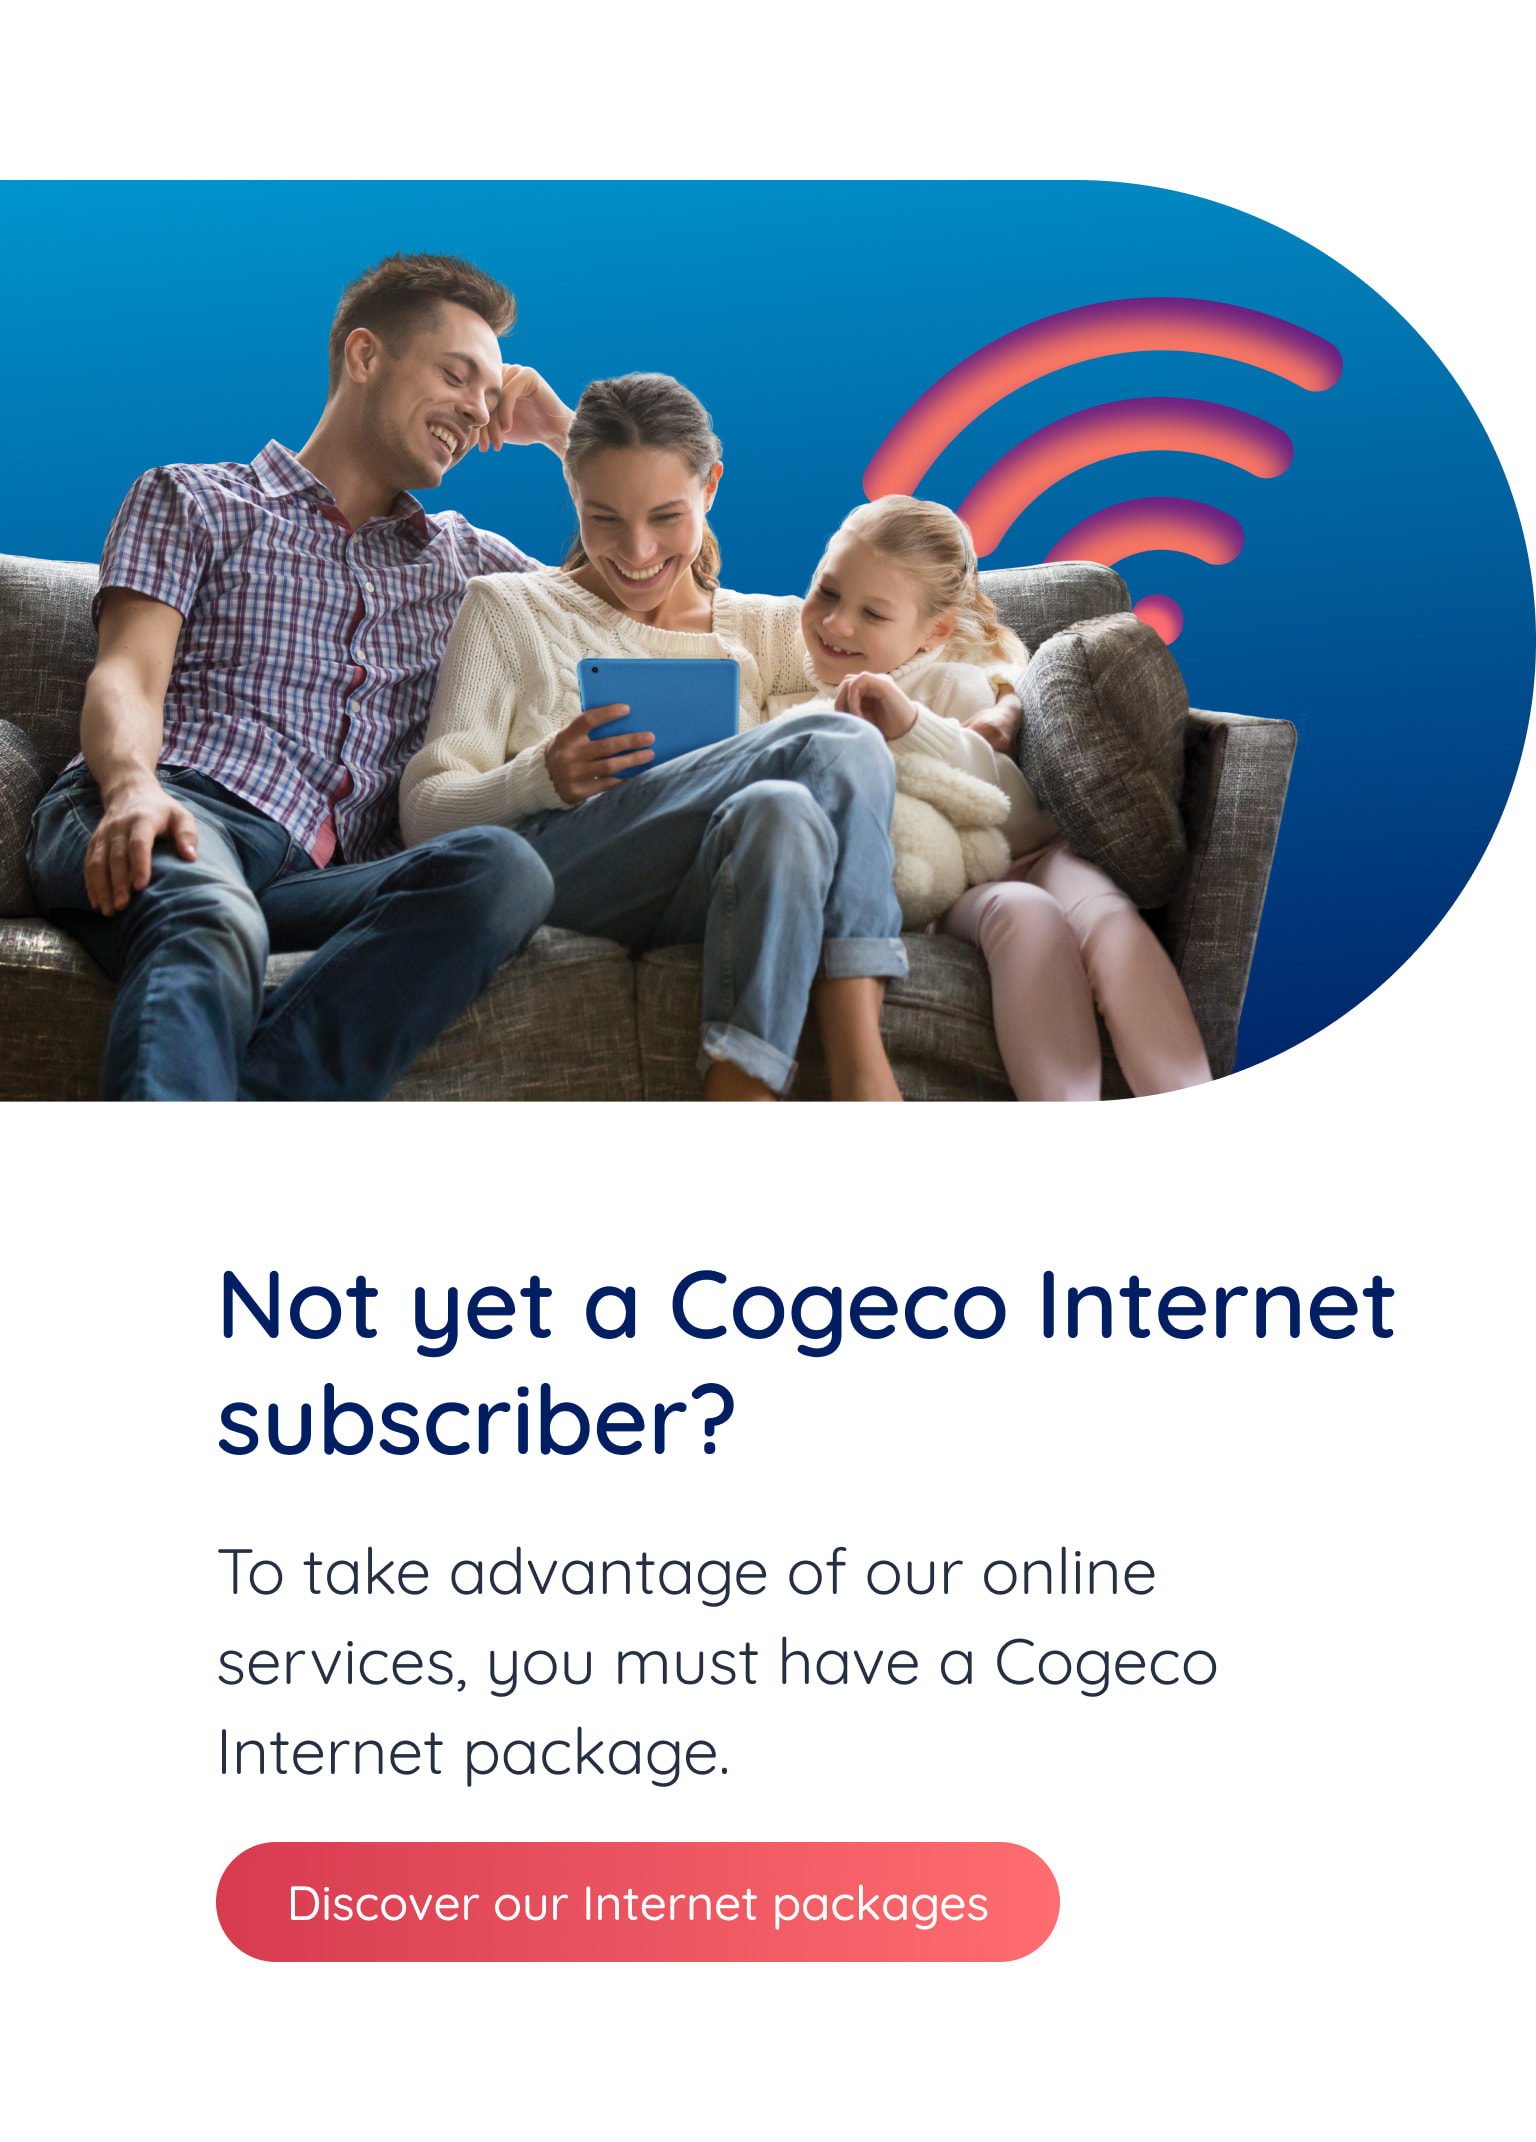 Not yet a Cogeco Internet subscriber? To take advantage of our online services, you must have a Cogeco package. Discover our Internet packages